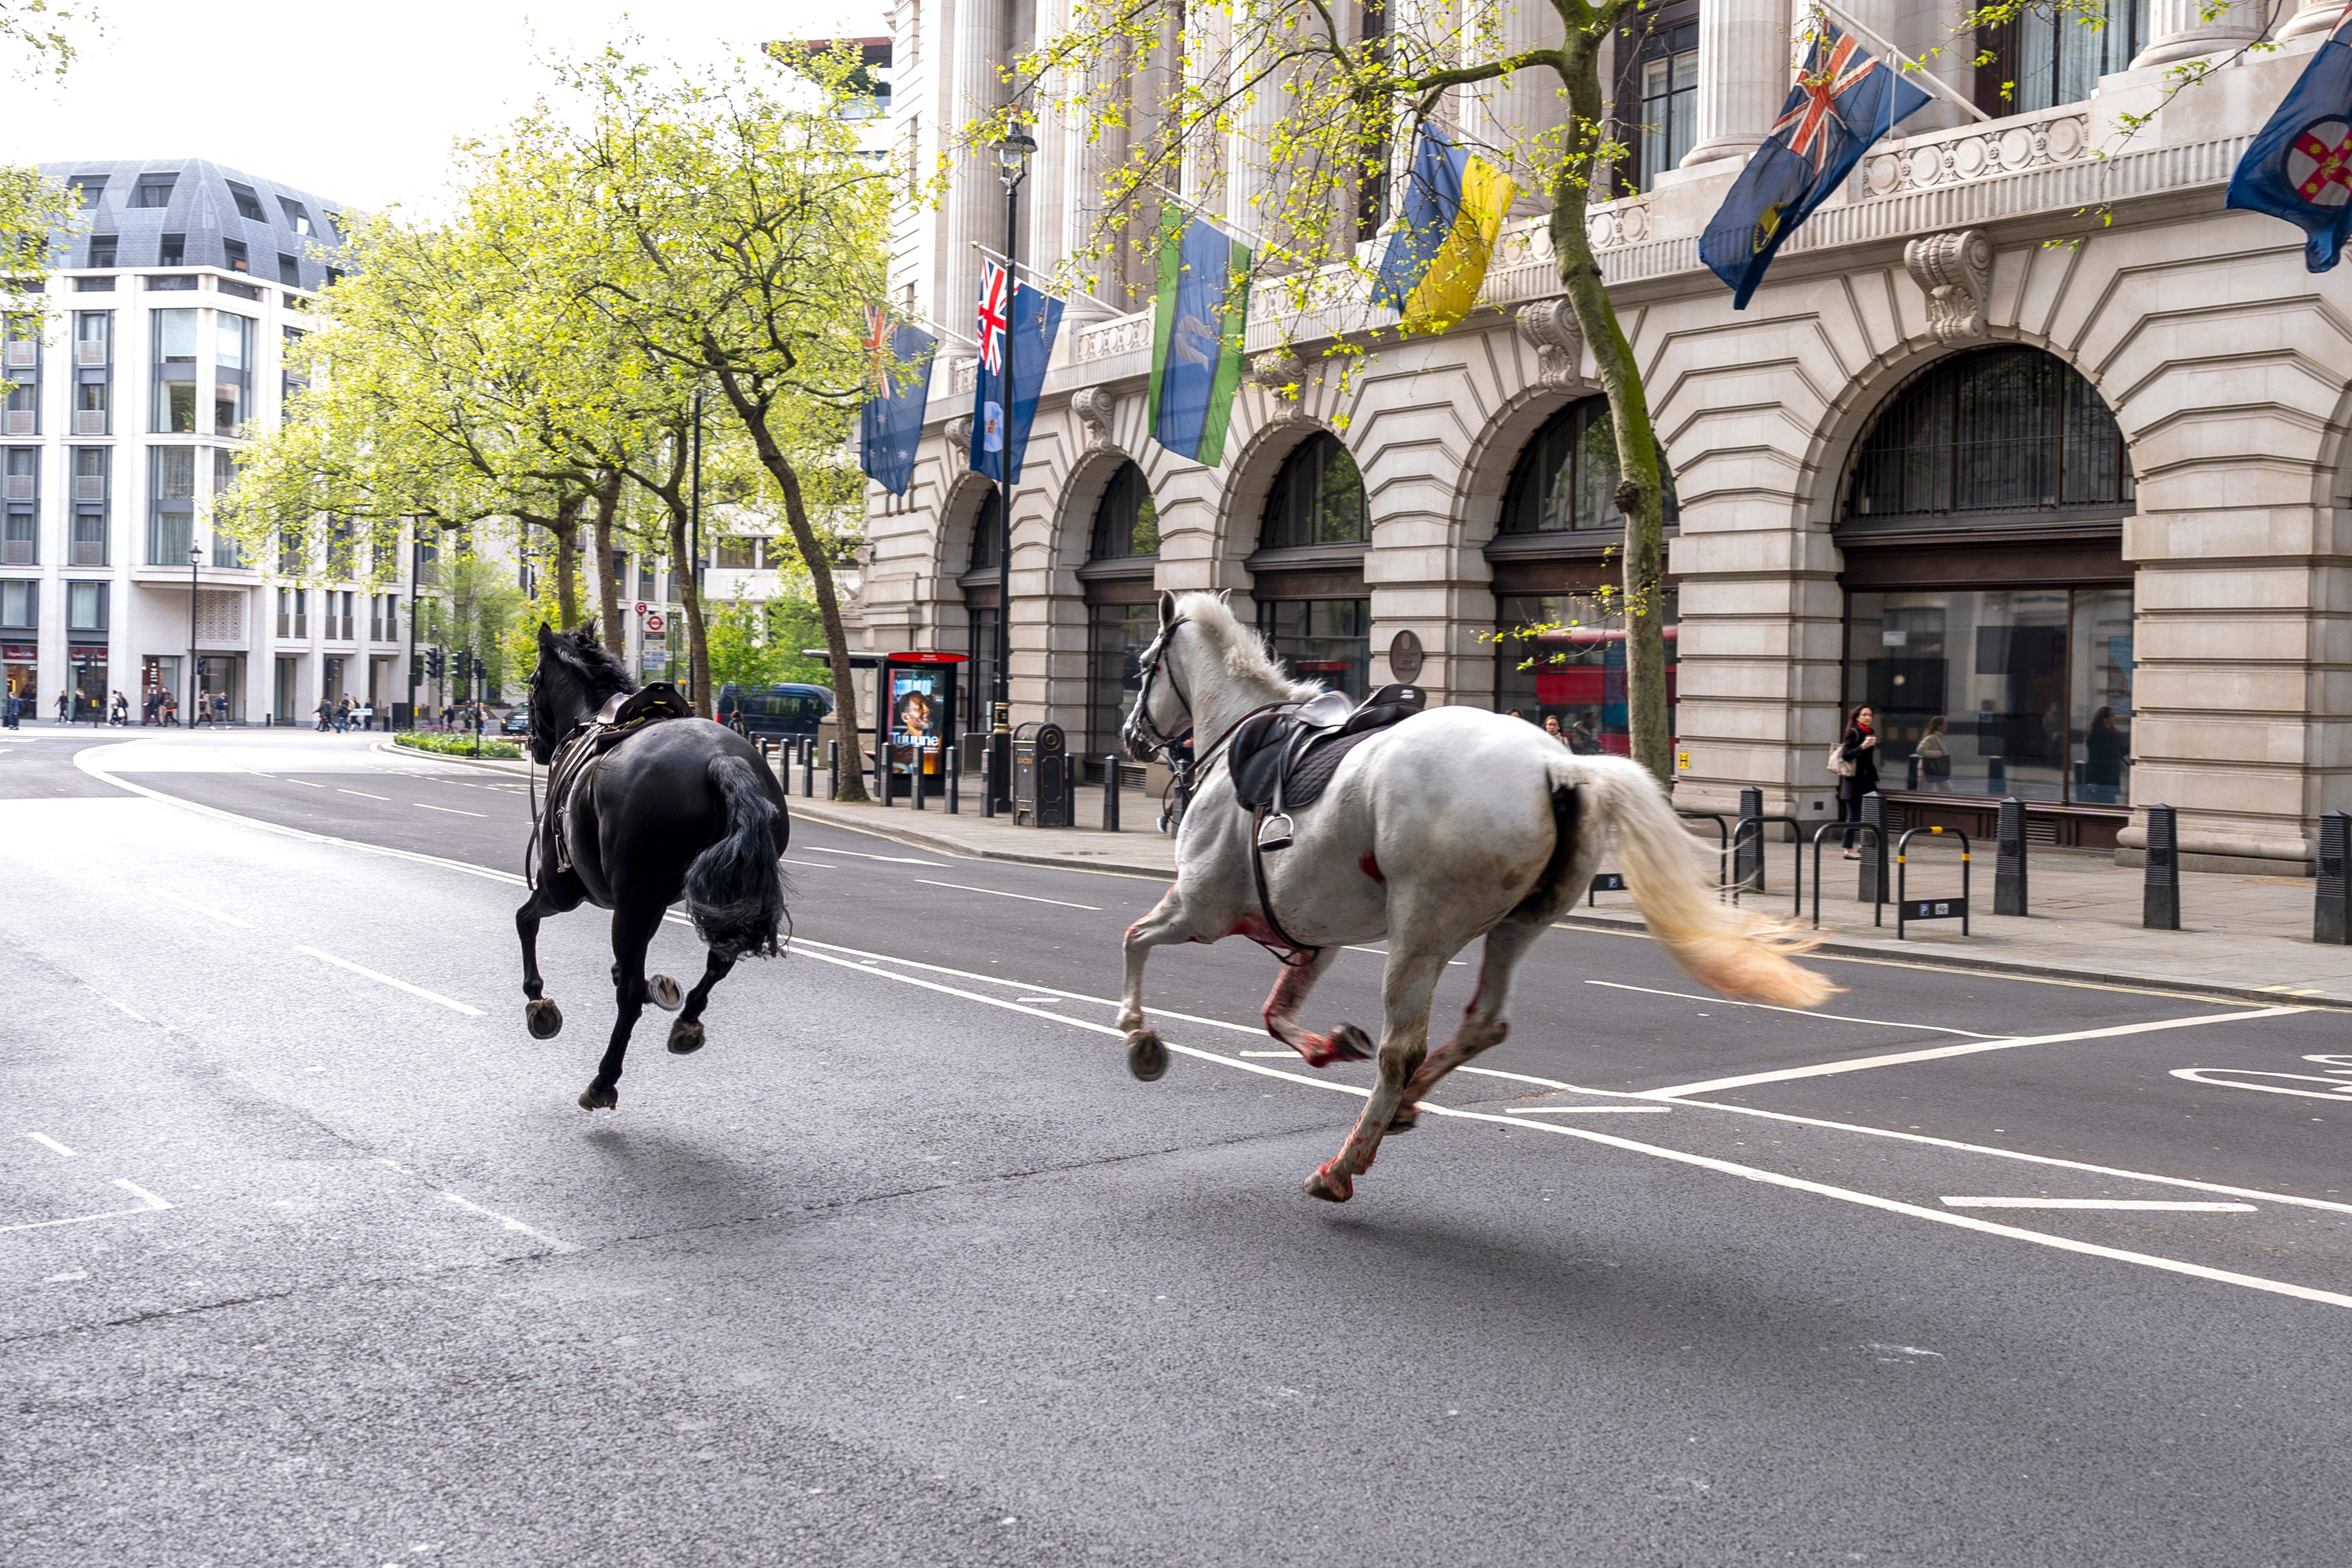 The horses were said to have become spooked during a training exercise in Whitehall